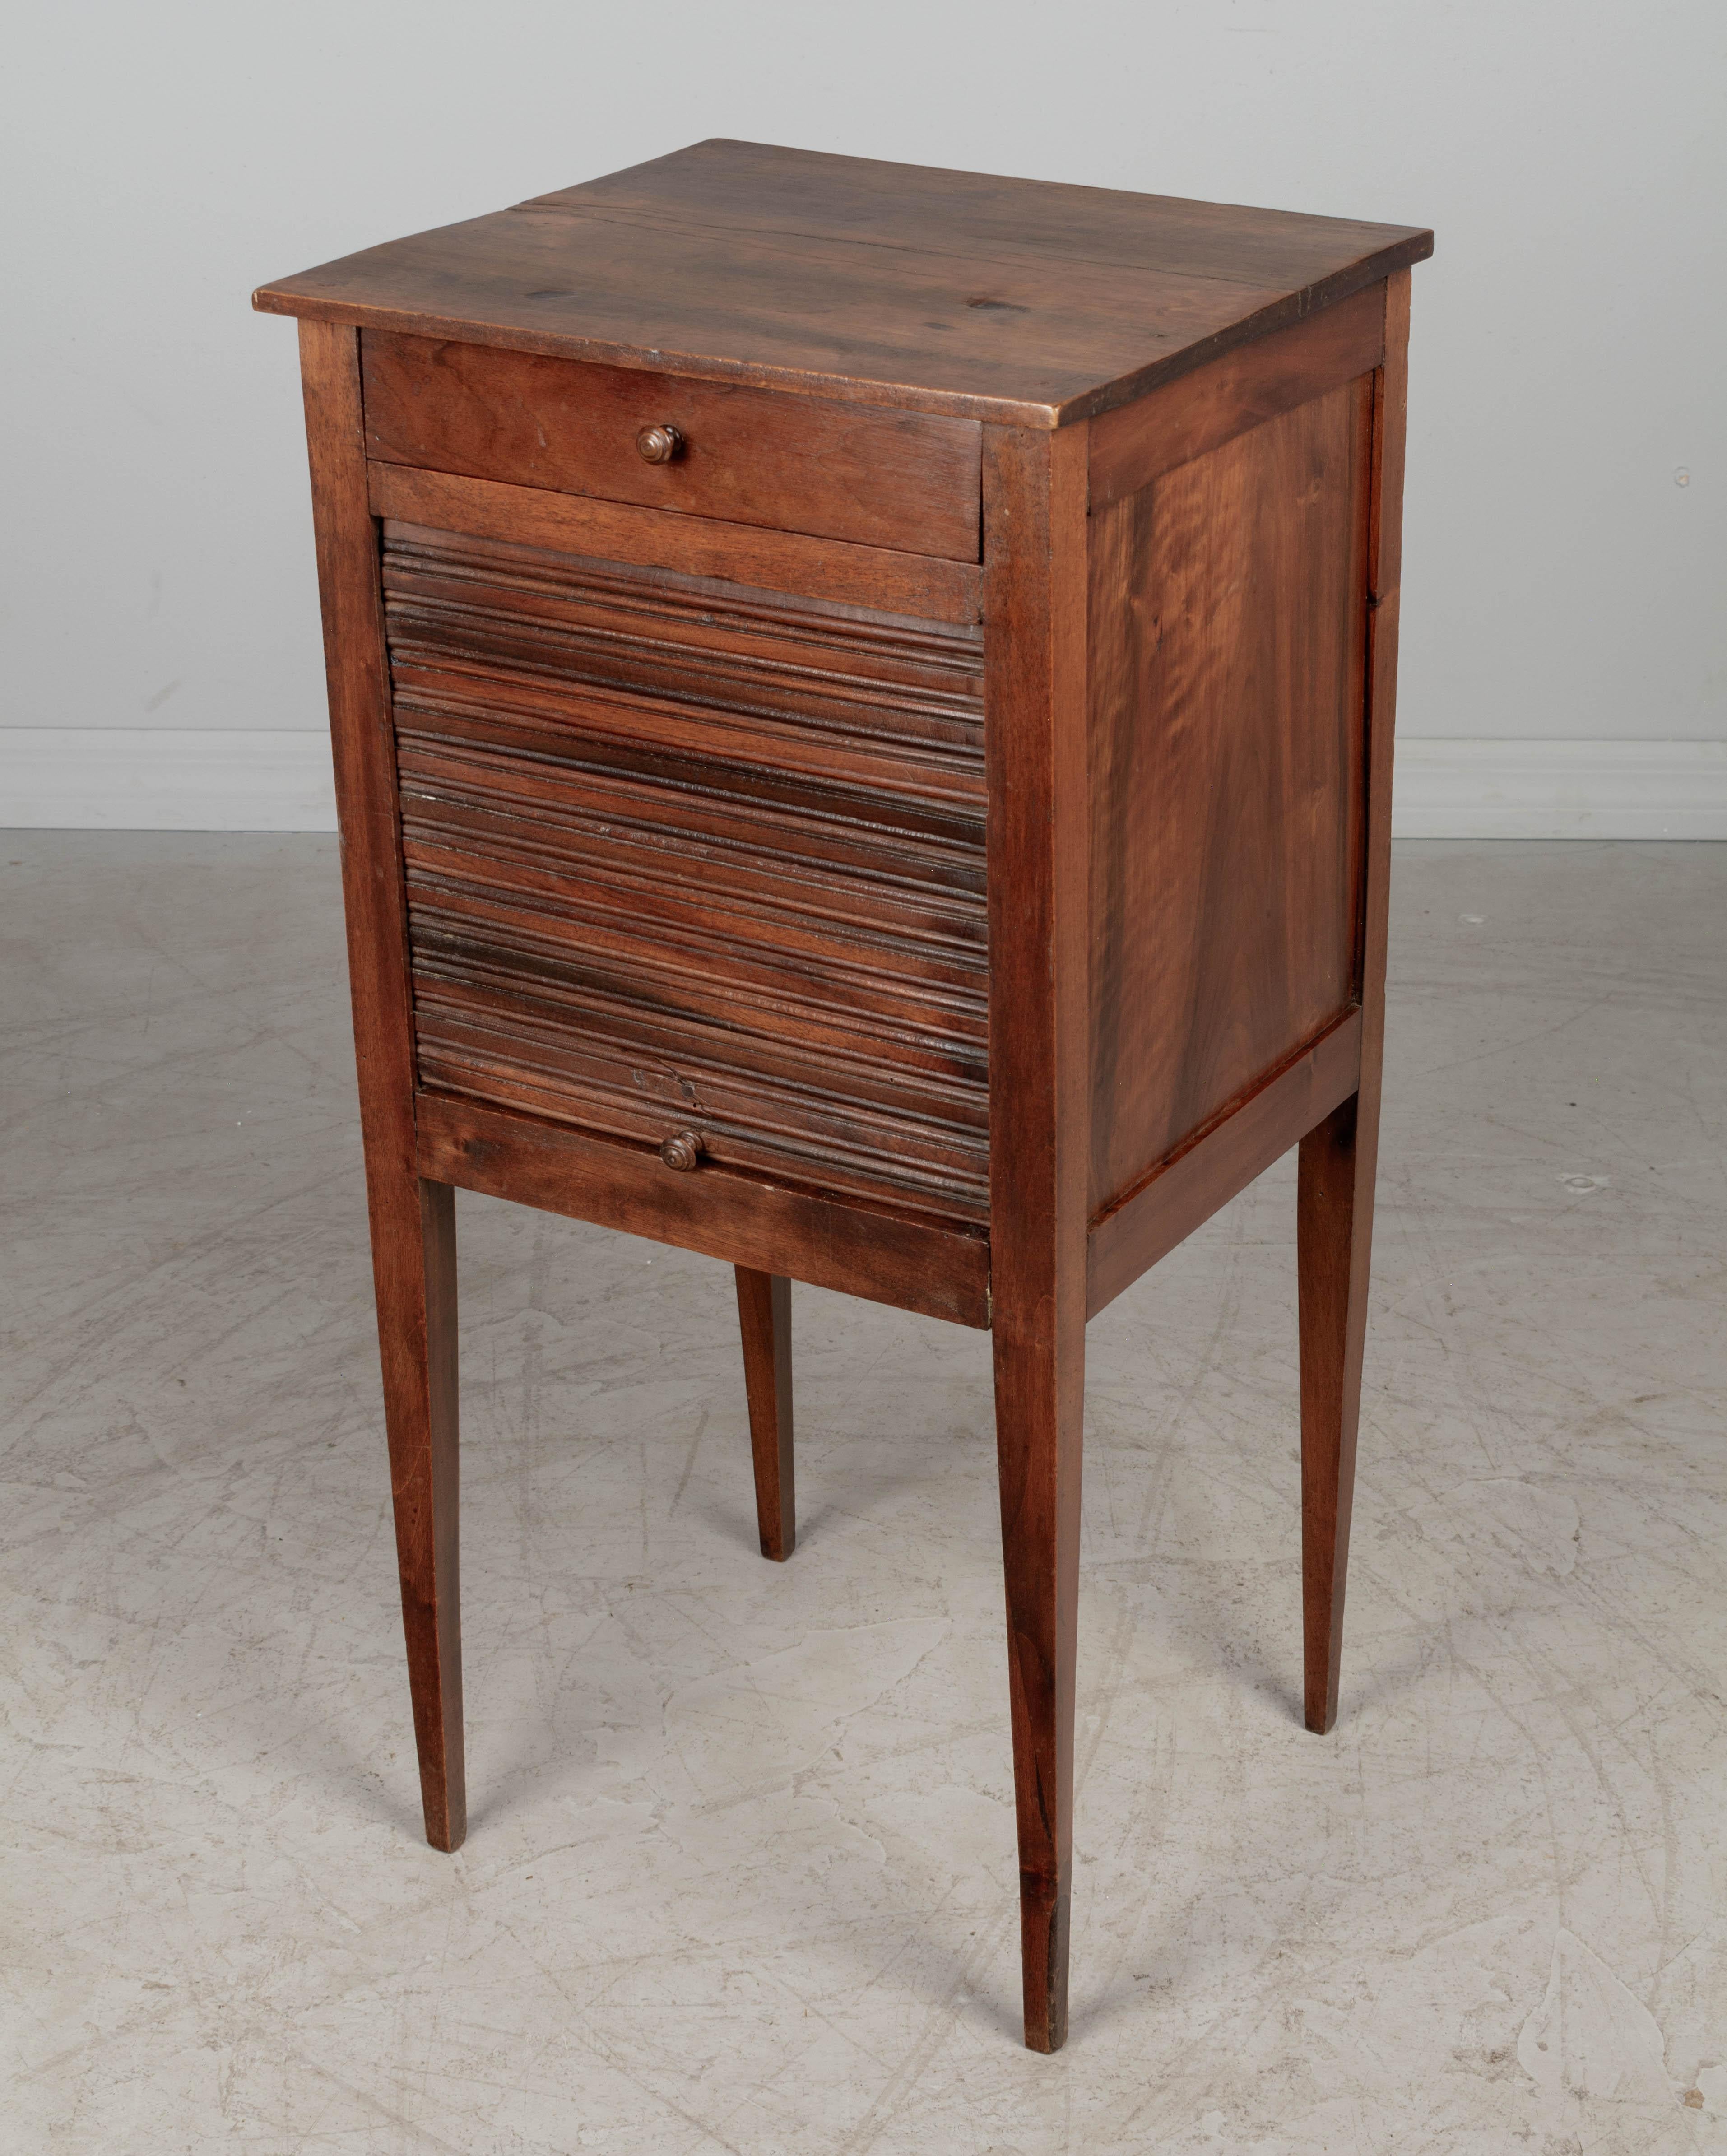 French Country Walnut Side Table with Tambour Door In Good Condition For Sale In Winter Park, FL